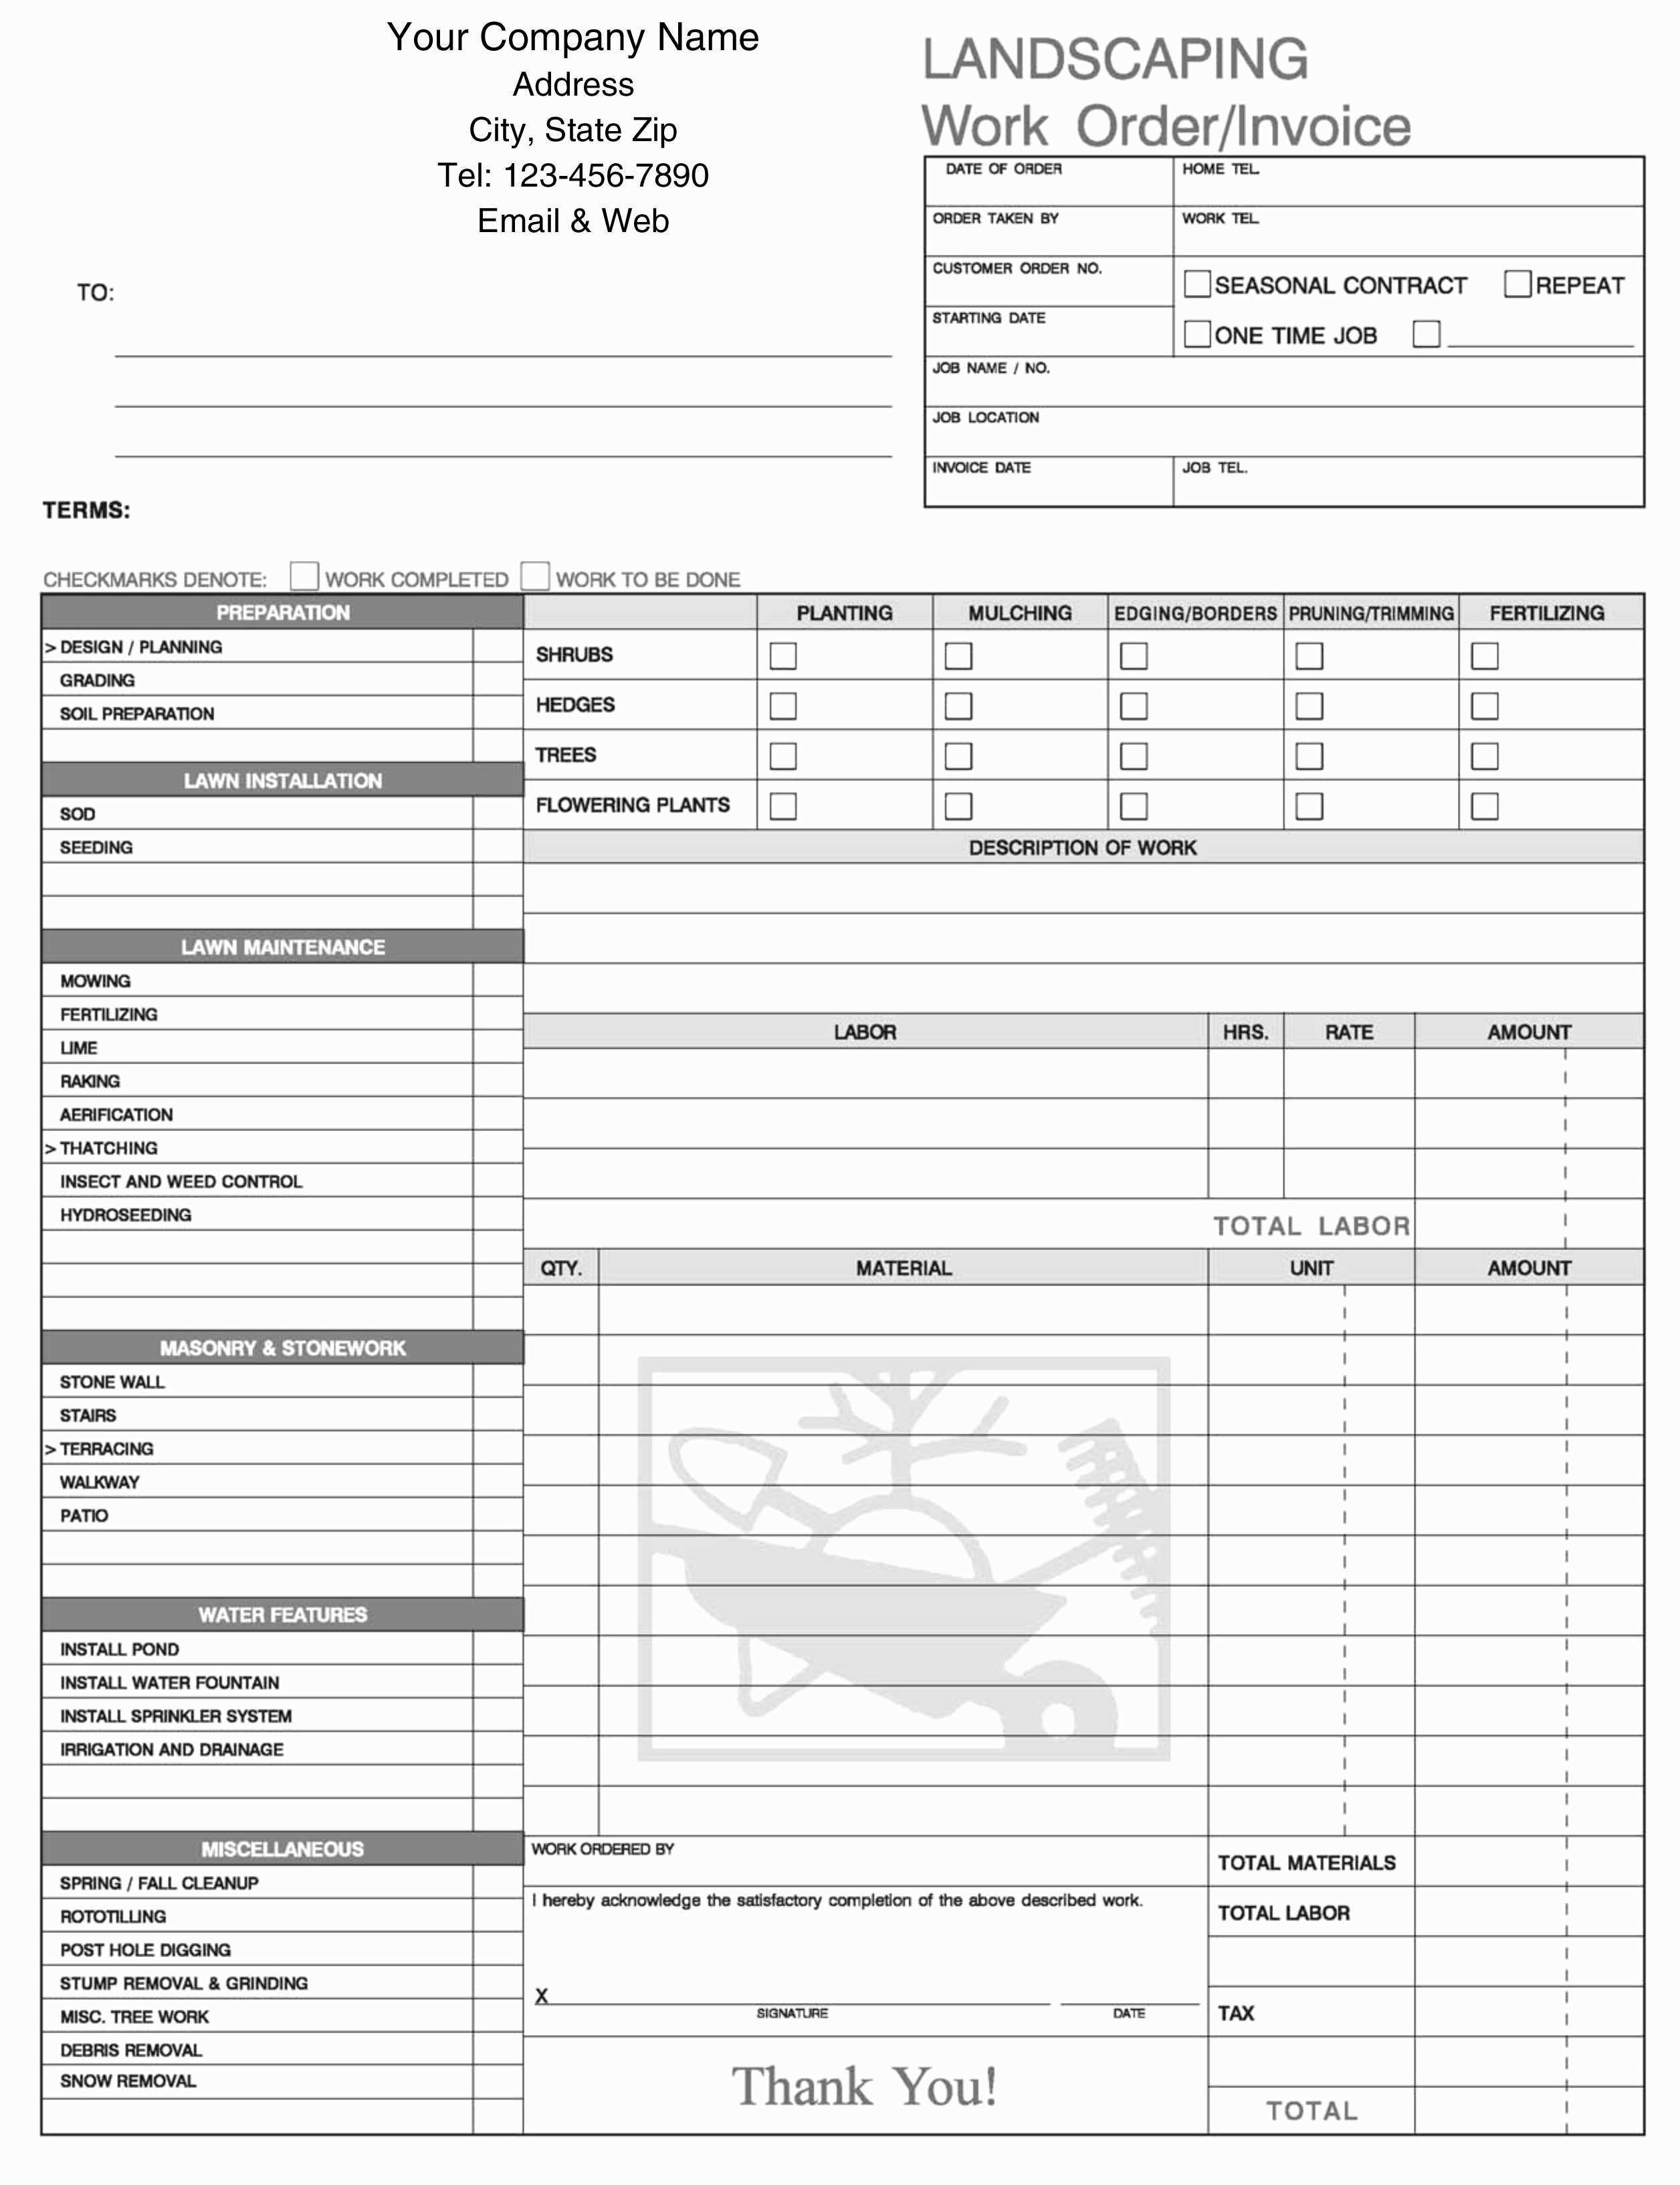 gardeninglandscaping service invoice template example free 6 sample